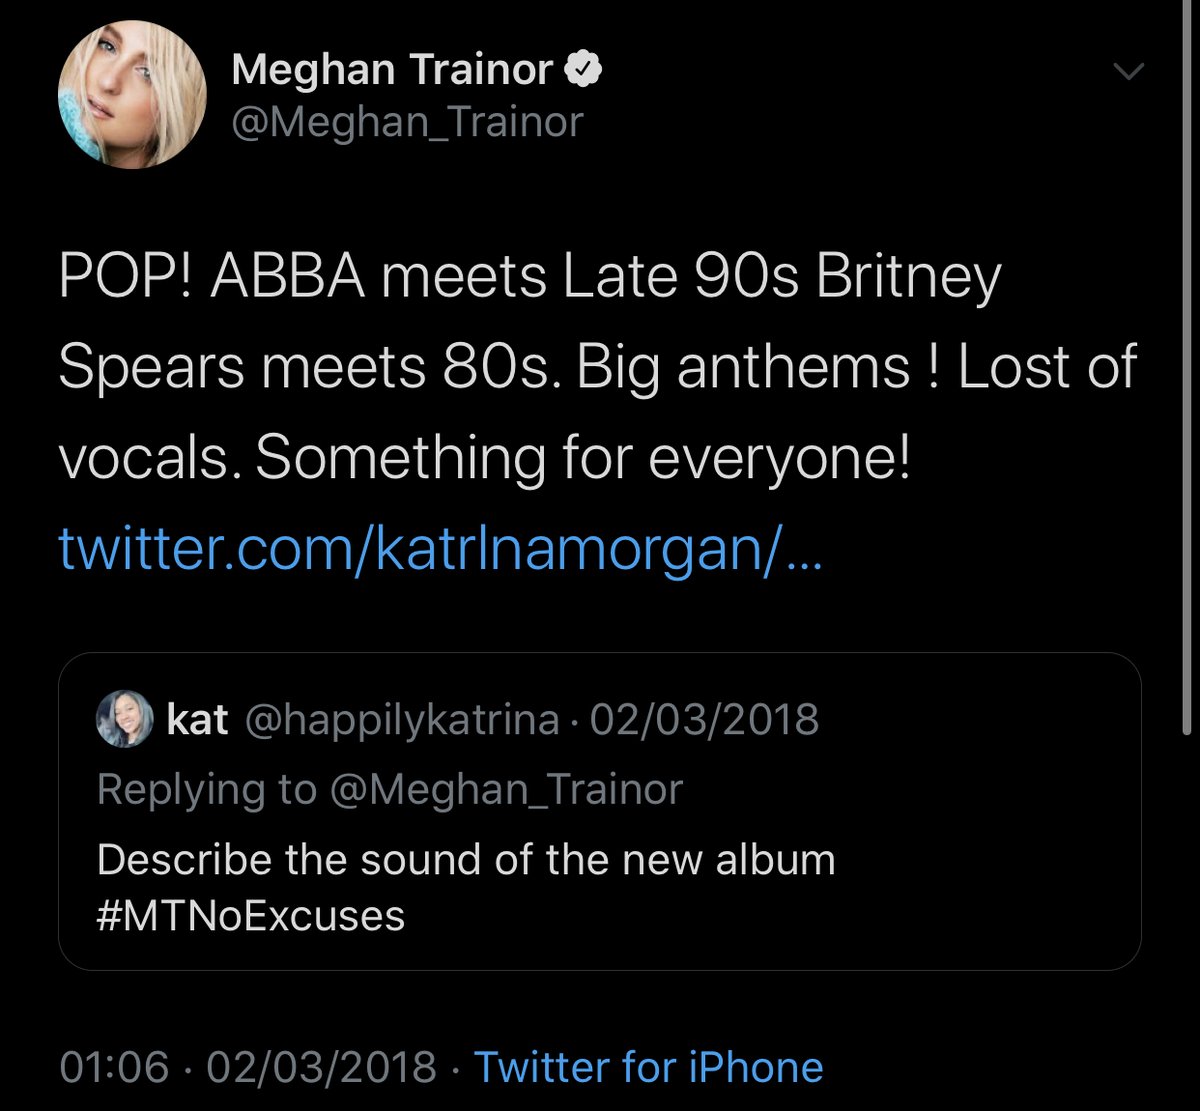 Britney served as the main inspiration for "Treat Myself", as well as songs like "No" and "Me Too." Meghan later mentioned her in the album booklet.